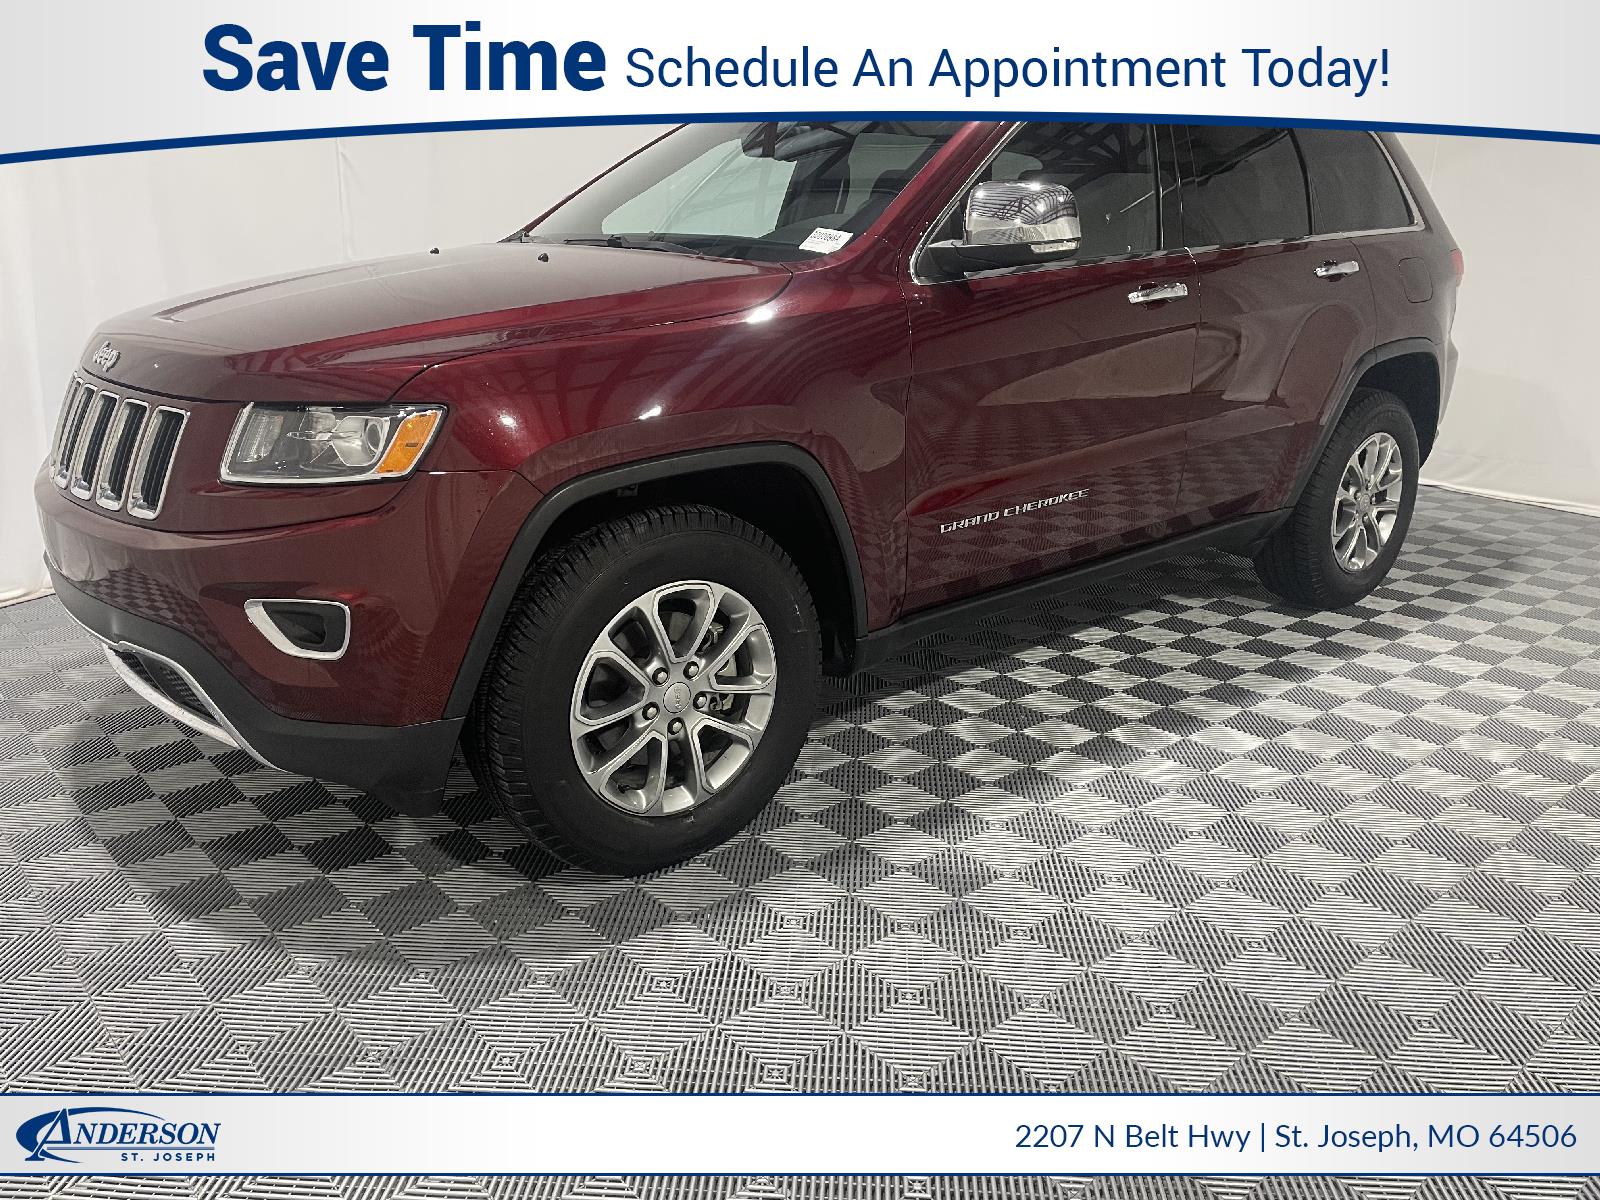 Used 2016 Jeep Grand Cherokee Limited Stock: 3002098A